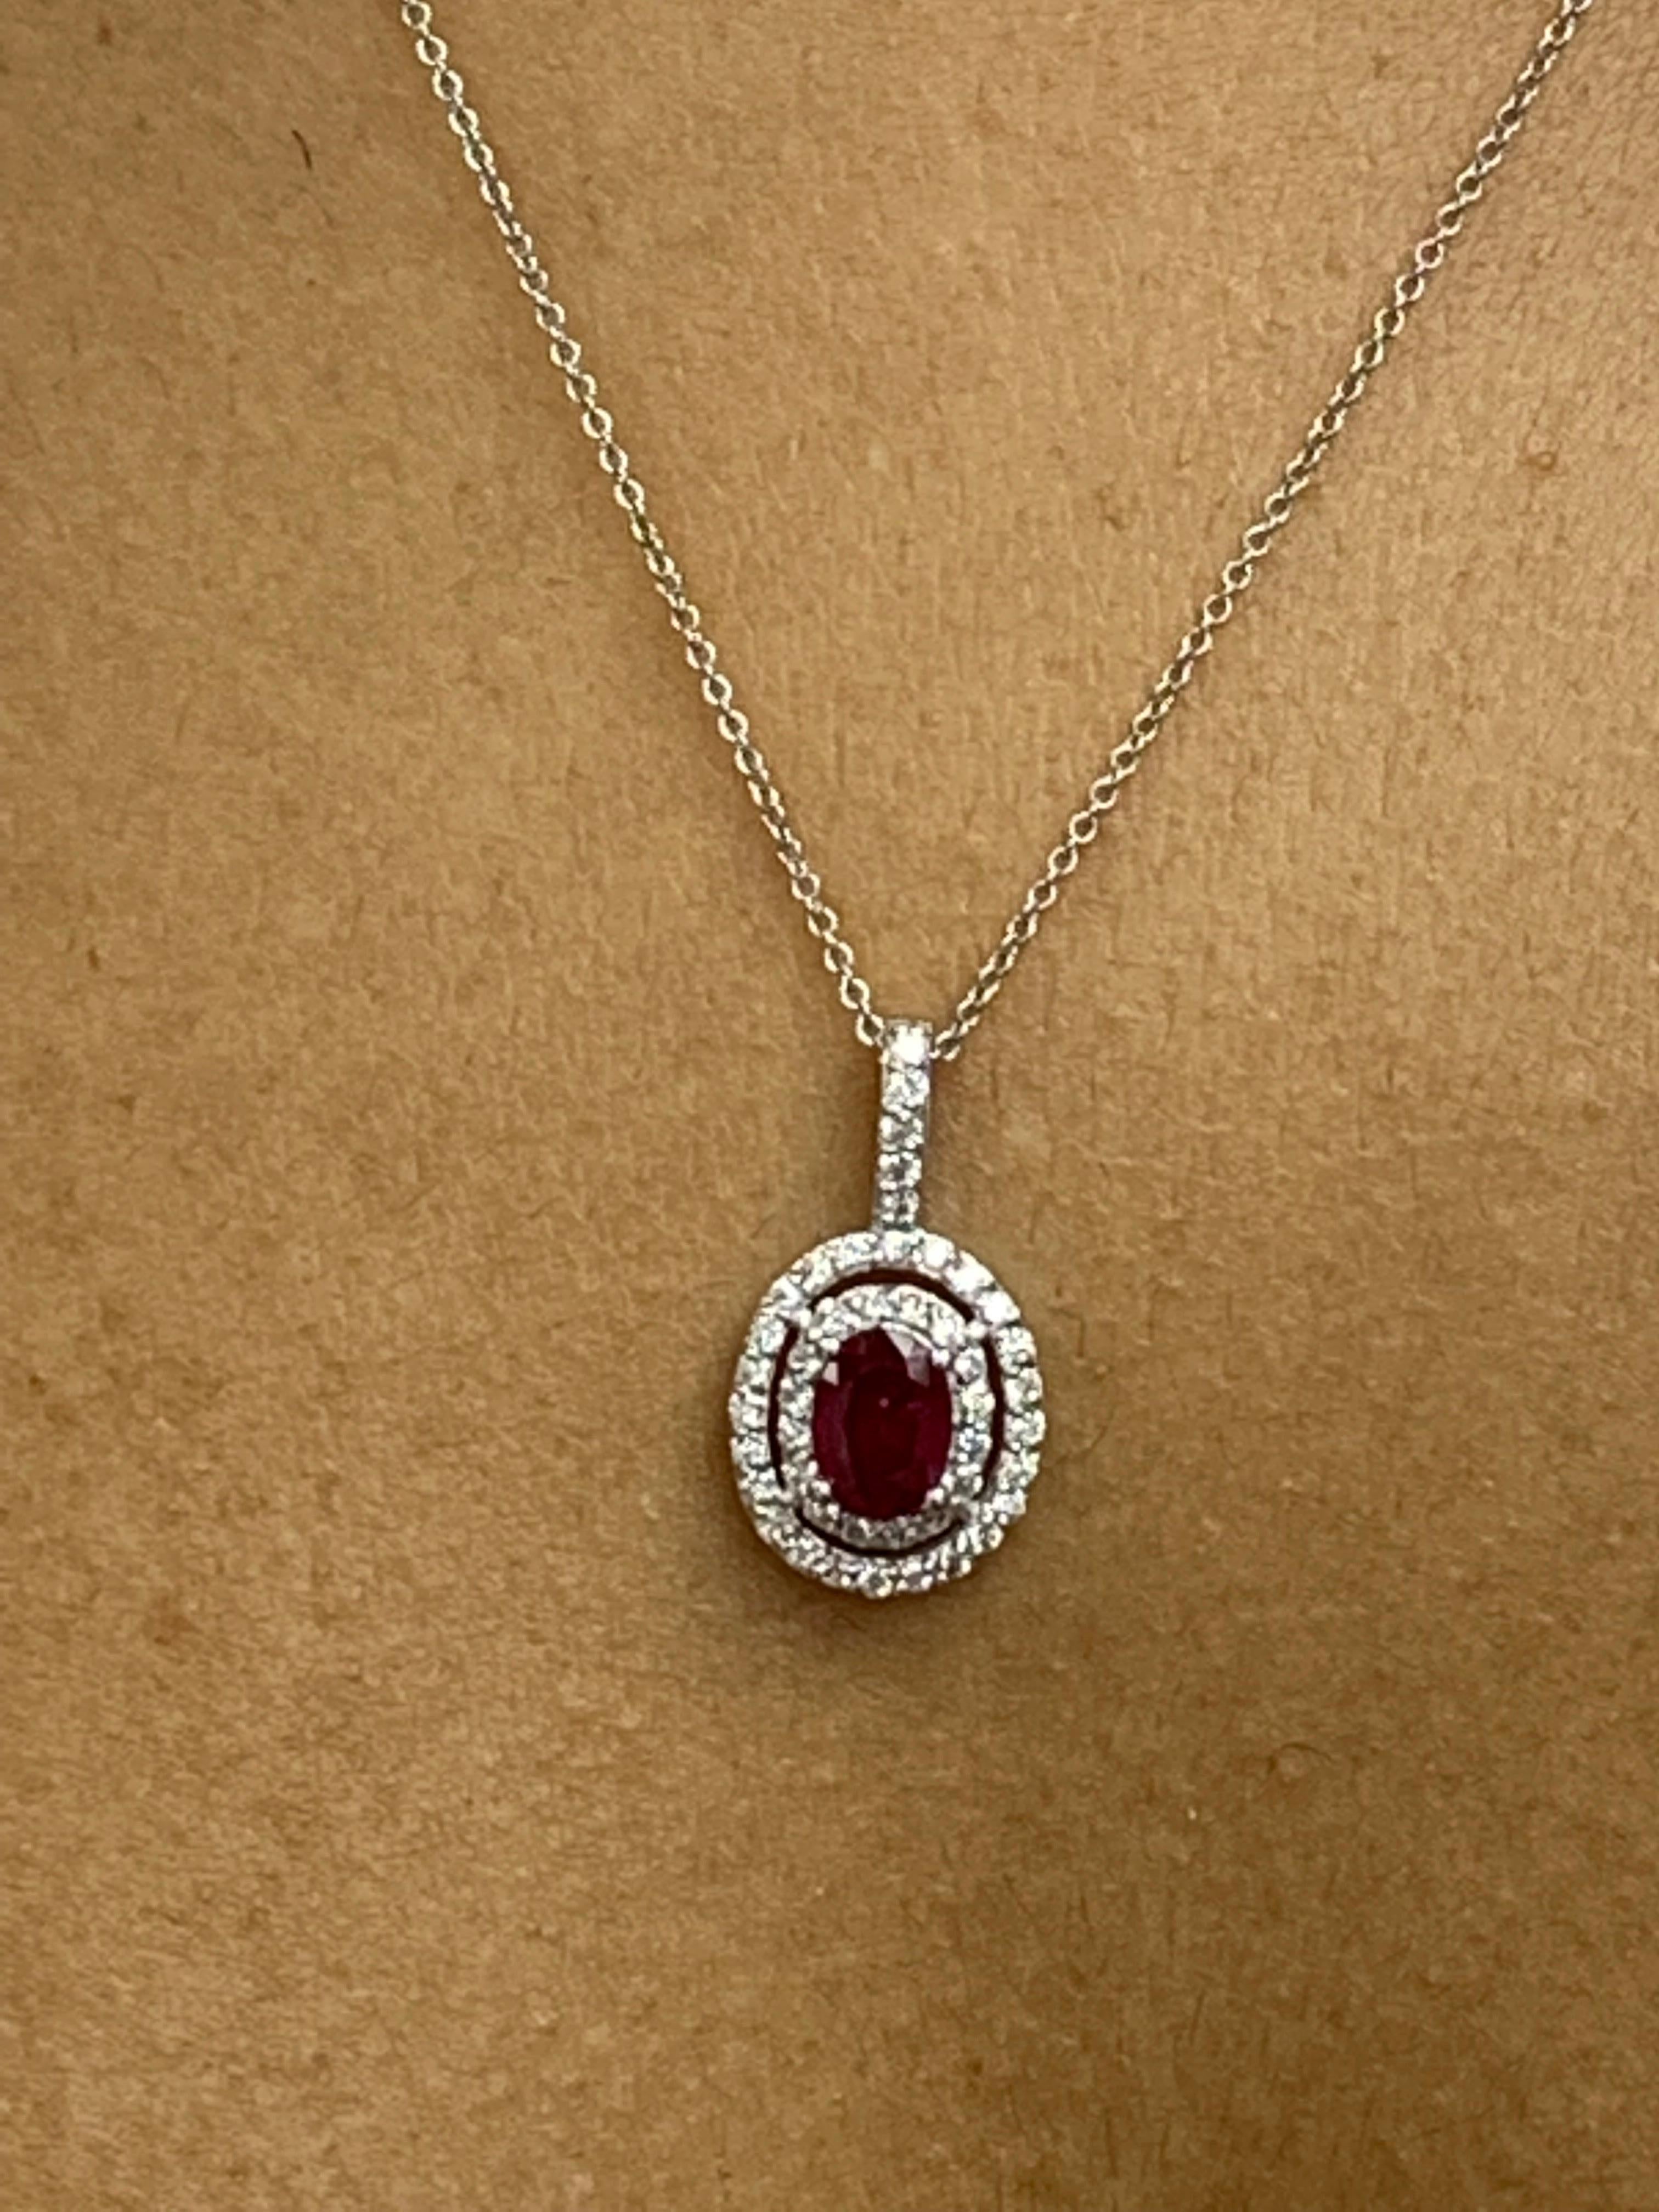 Grandeur 0.81 Carat Oval Cut Ruby and Diamond Pendant in 14K White Gold For Sale 5